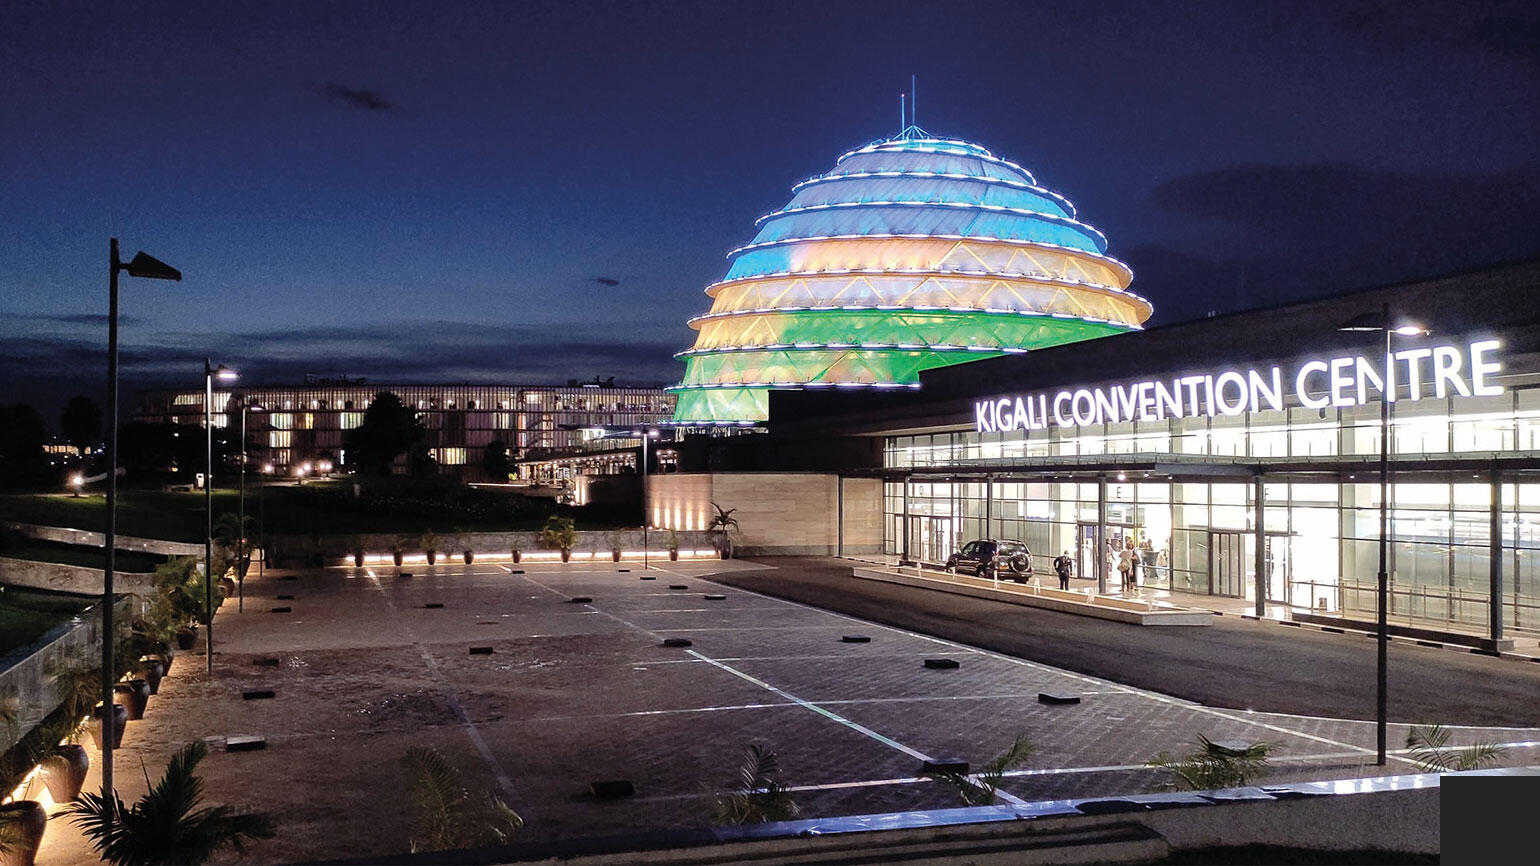 view on the Kigali Convention Center at night